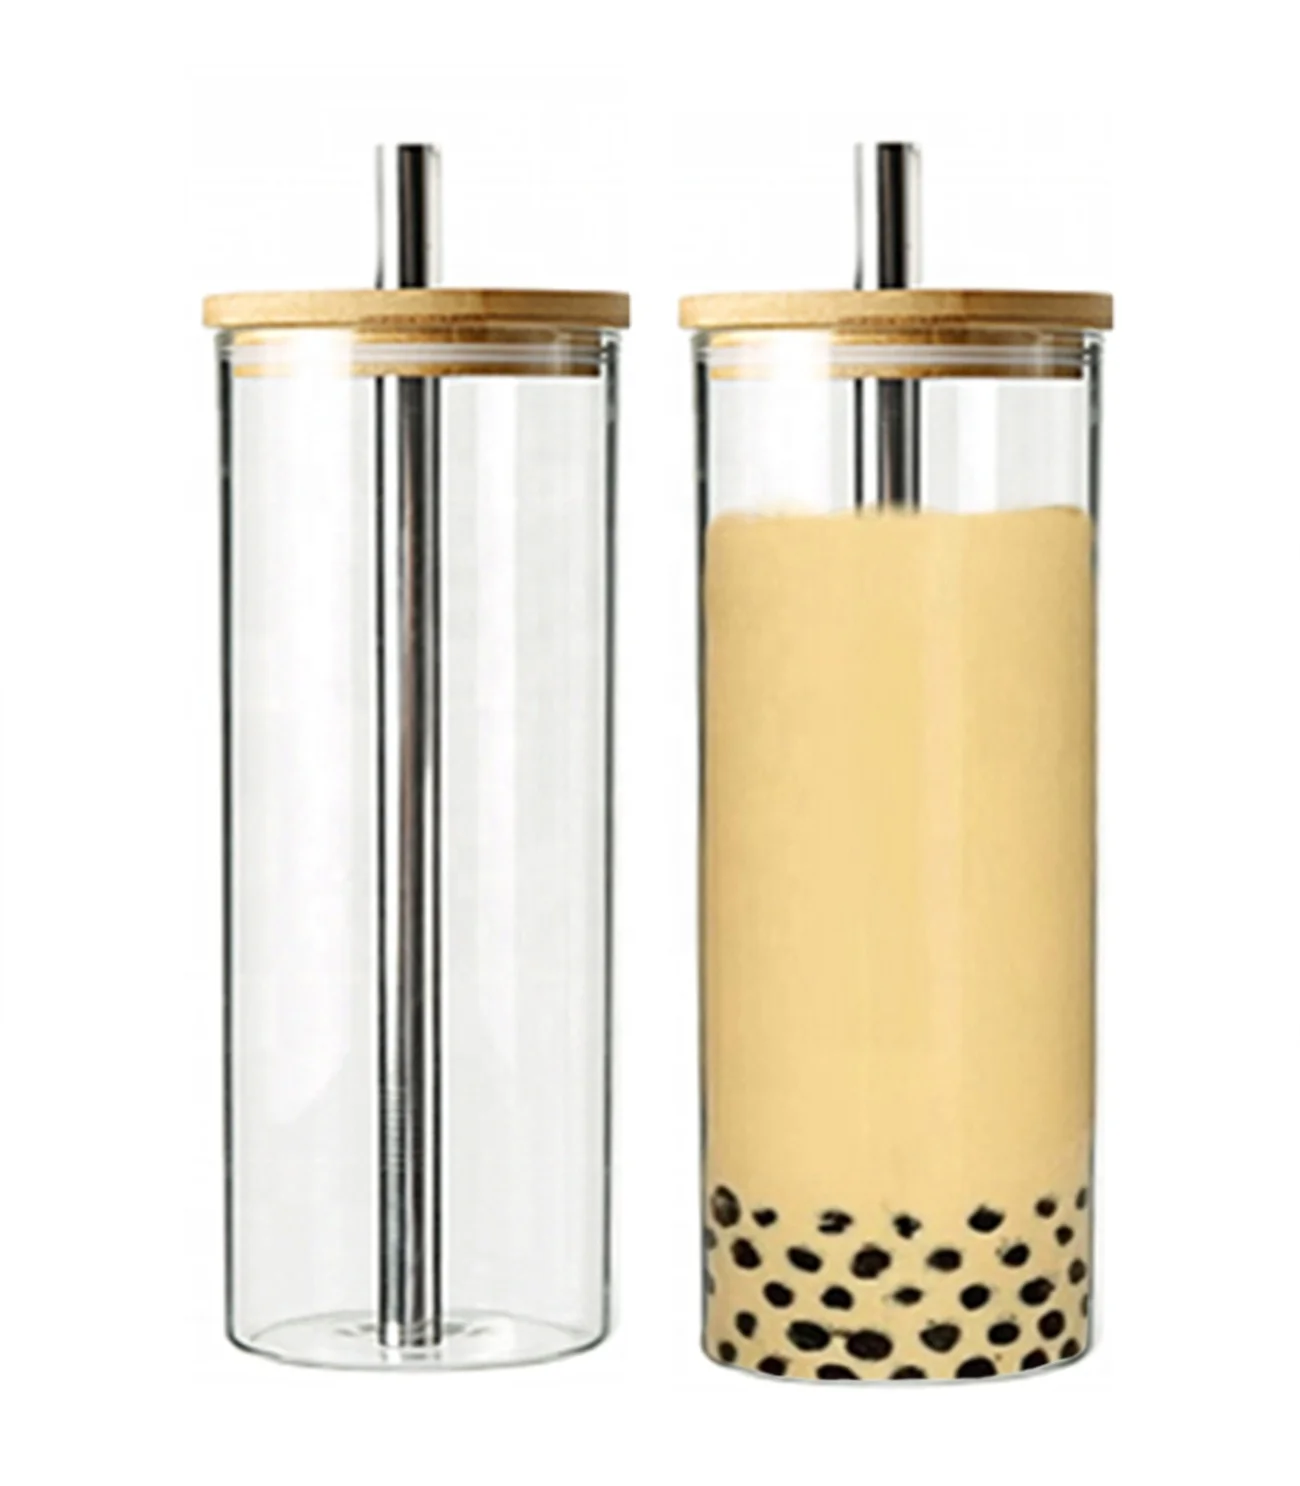 

2021 Amazon Newest 17 oz Bamboo Tea Tumbler Glass Water Bottle With Infuser and glass water bottle straw bamboo lid, Transparent